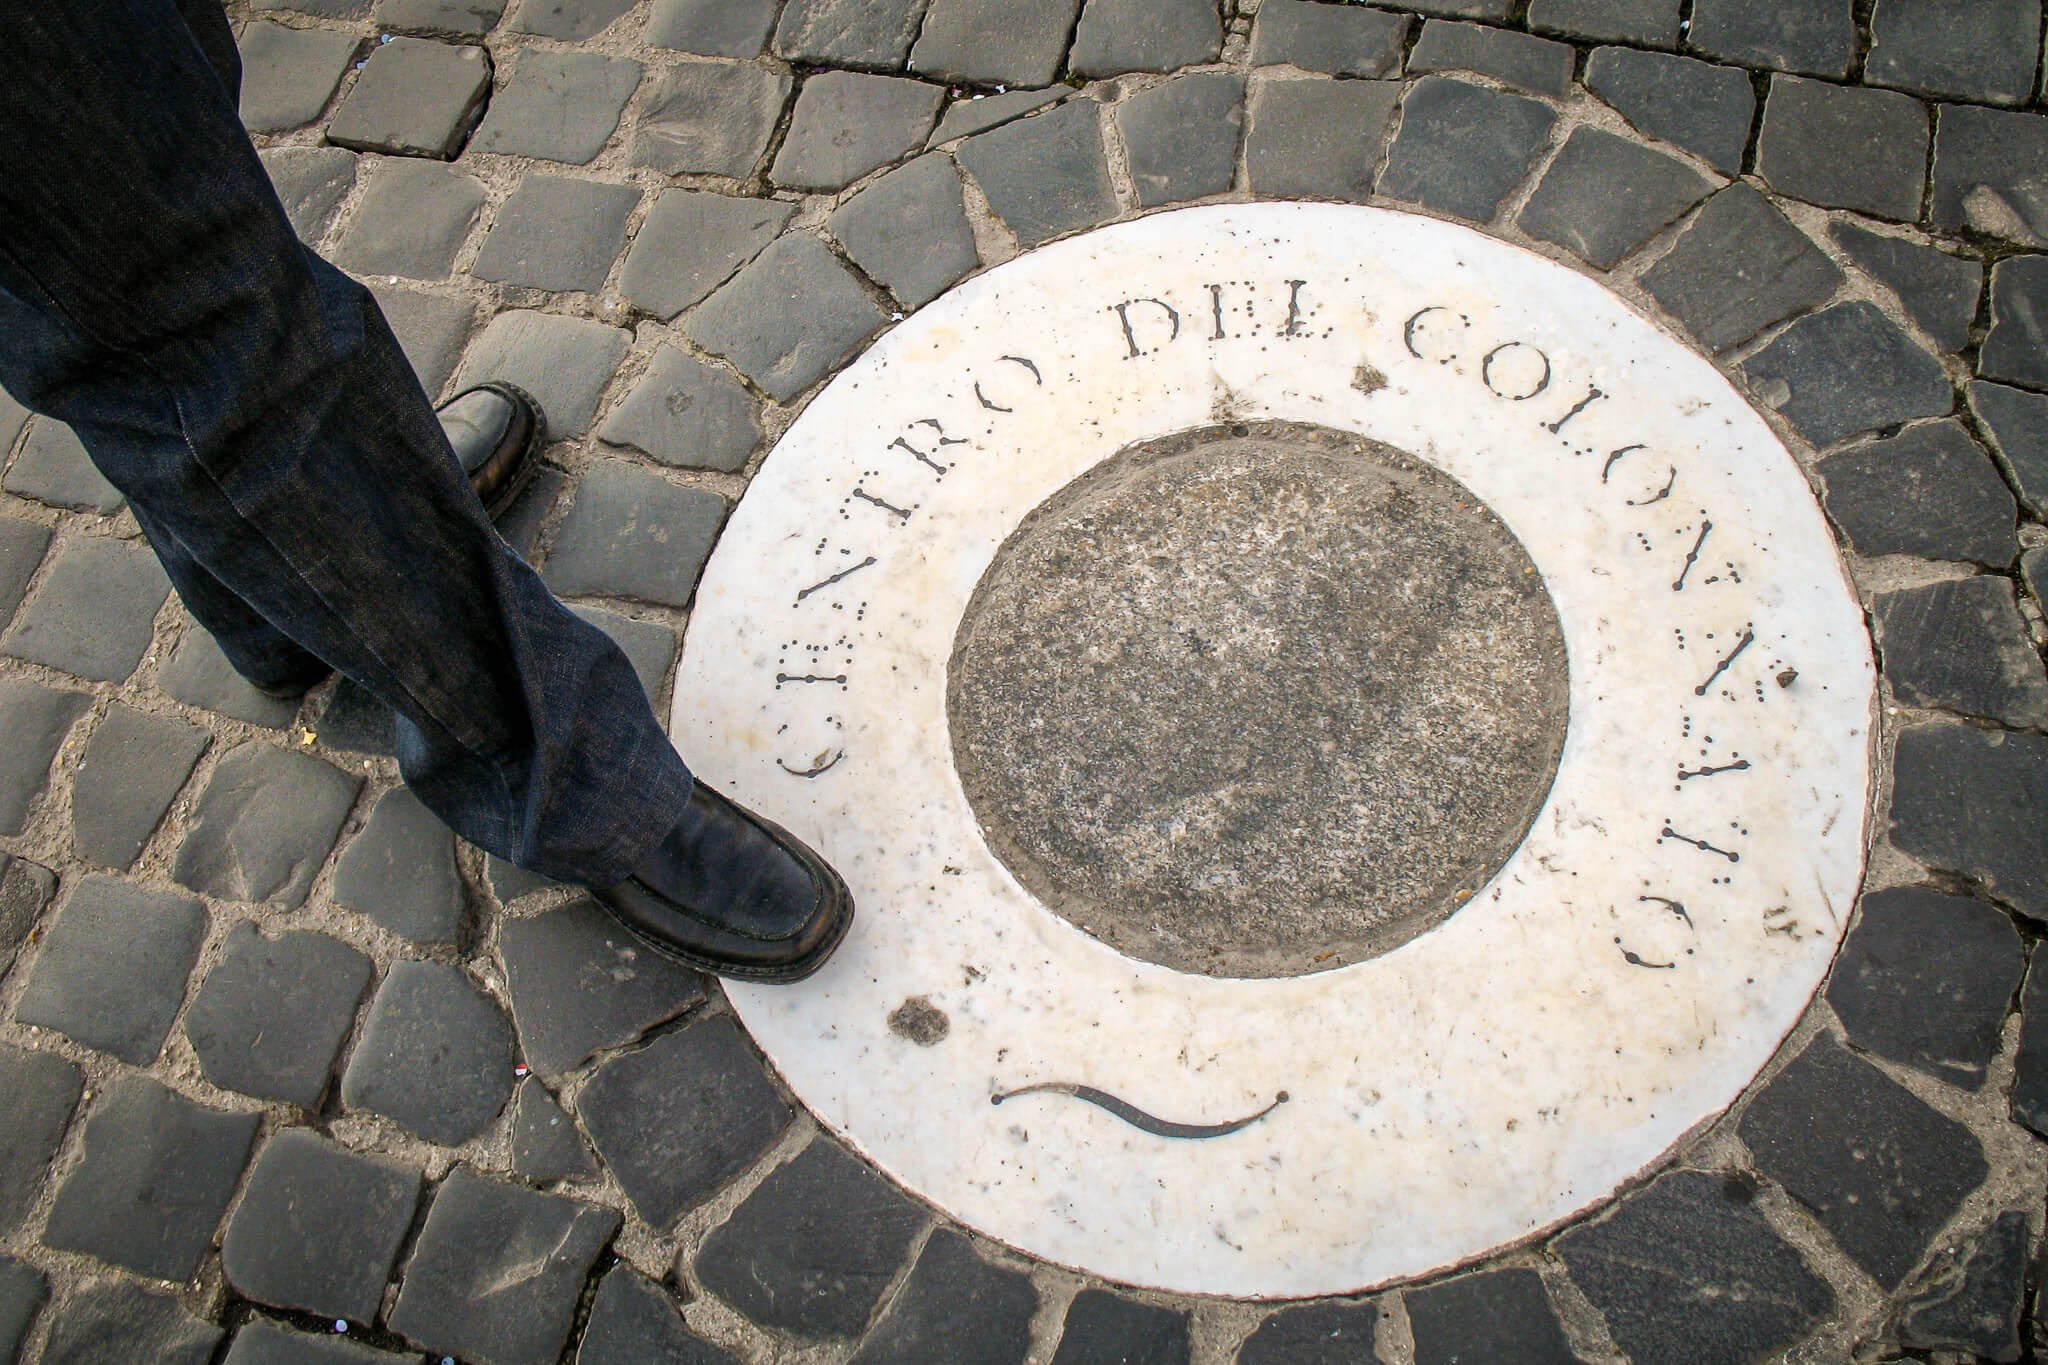 Stone marking the centre of the colonnade in Saint Peter's square